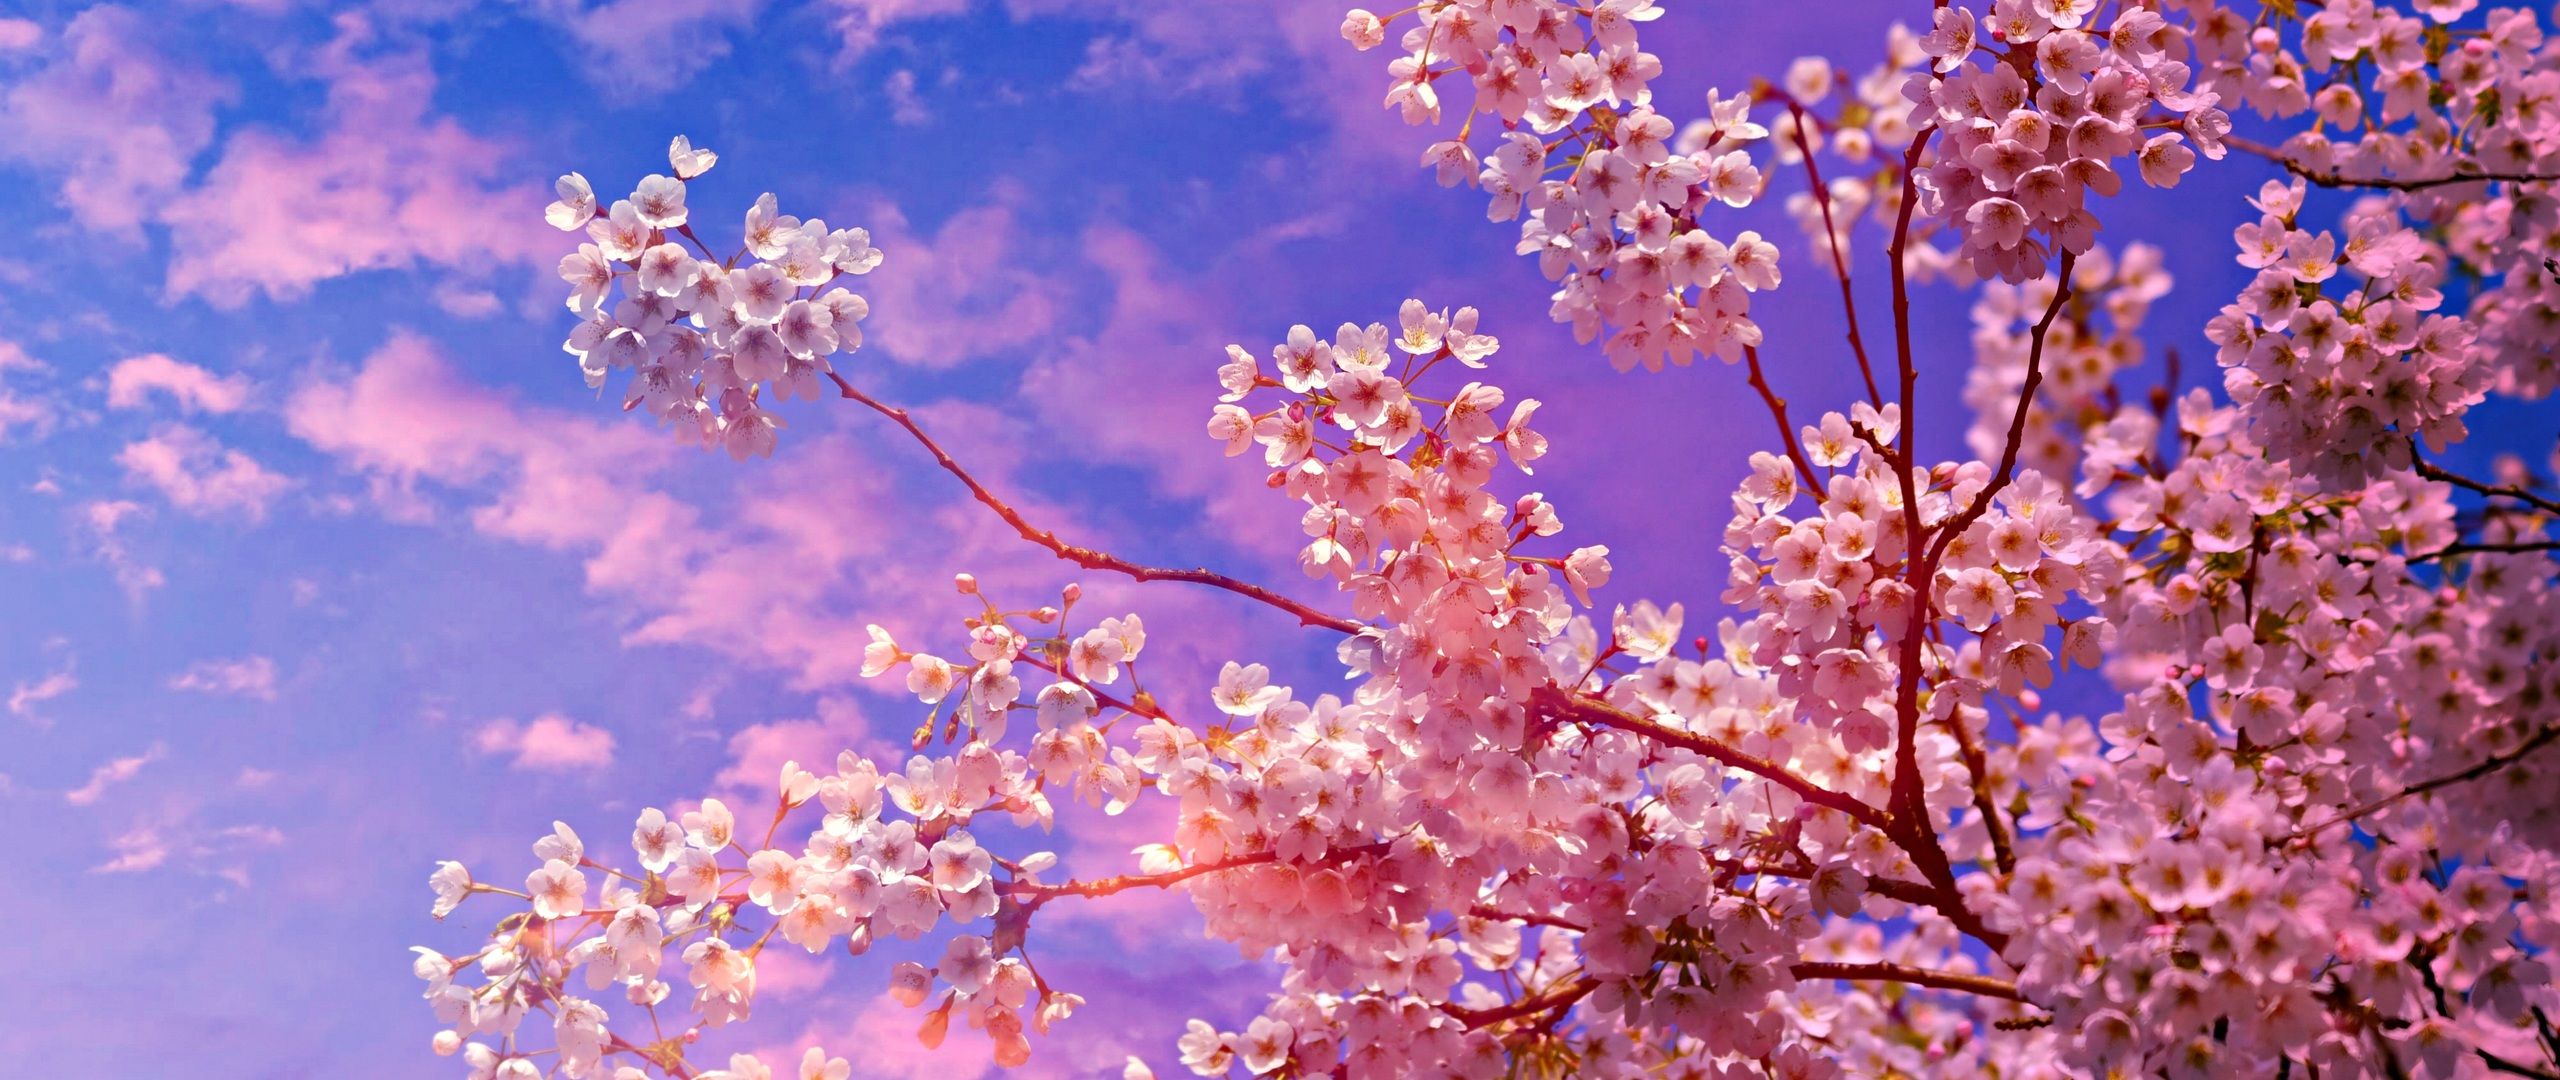 Cherry Blossom Tree 4k 5k 2560x1080 Resolution HD 4k Wallpaper, Image, Background, Photo and Picture